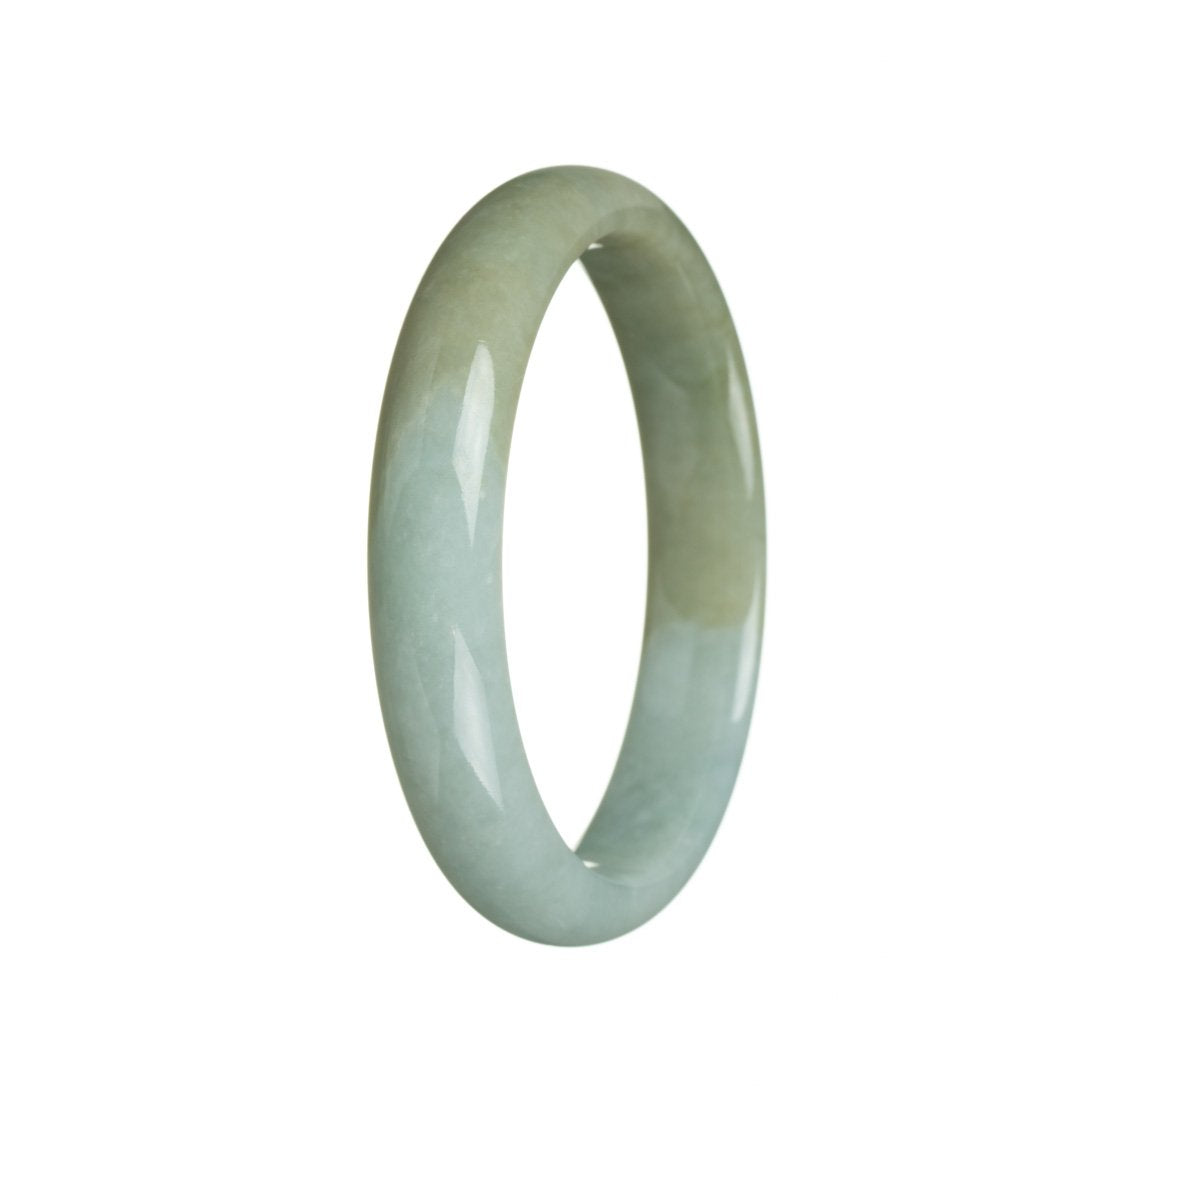 A close-up image of a stunning certified untreated green and brownish green jadeite jade bracelet. The bracelet features a 56mm half moon shape, showcasing the natural beauty of the jadeite jade.